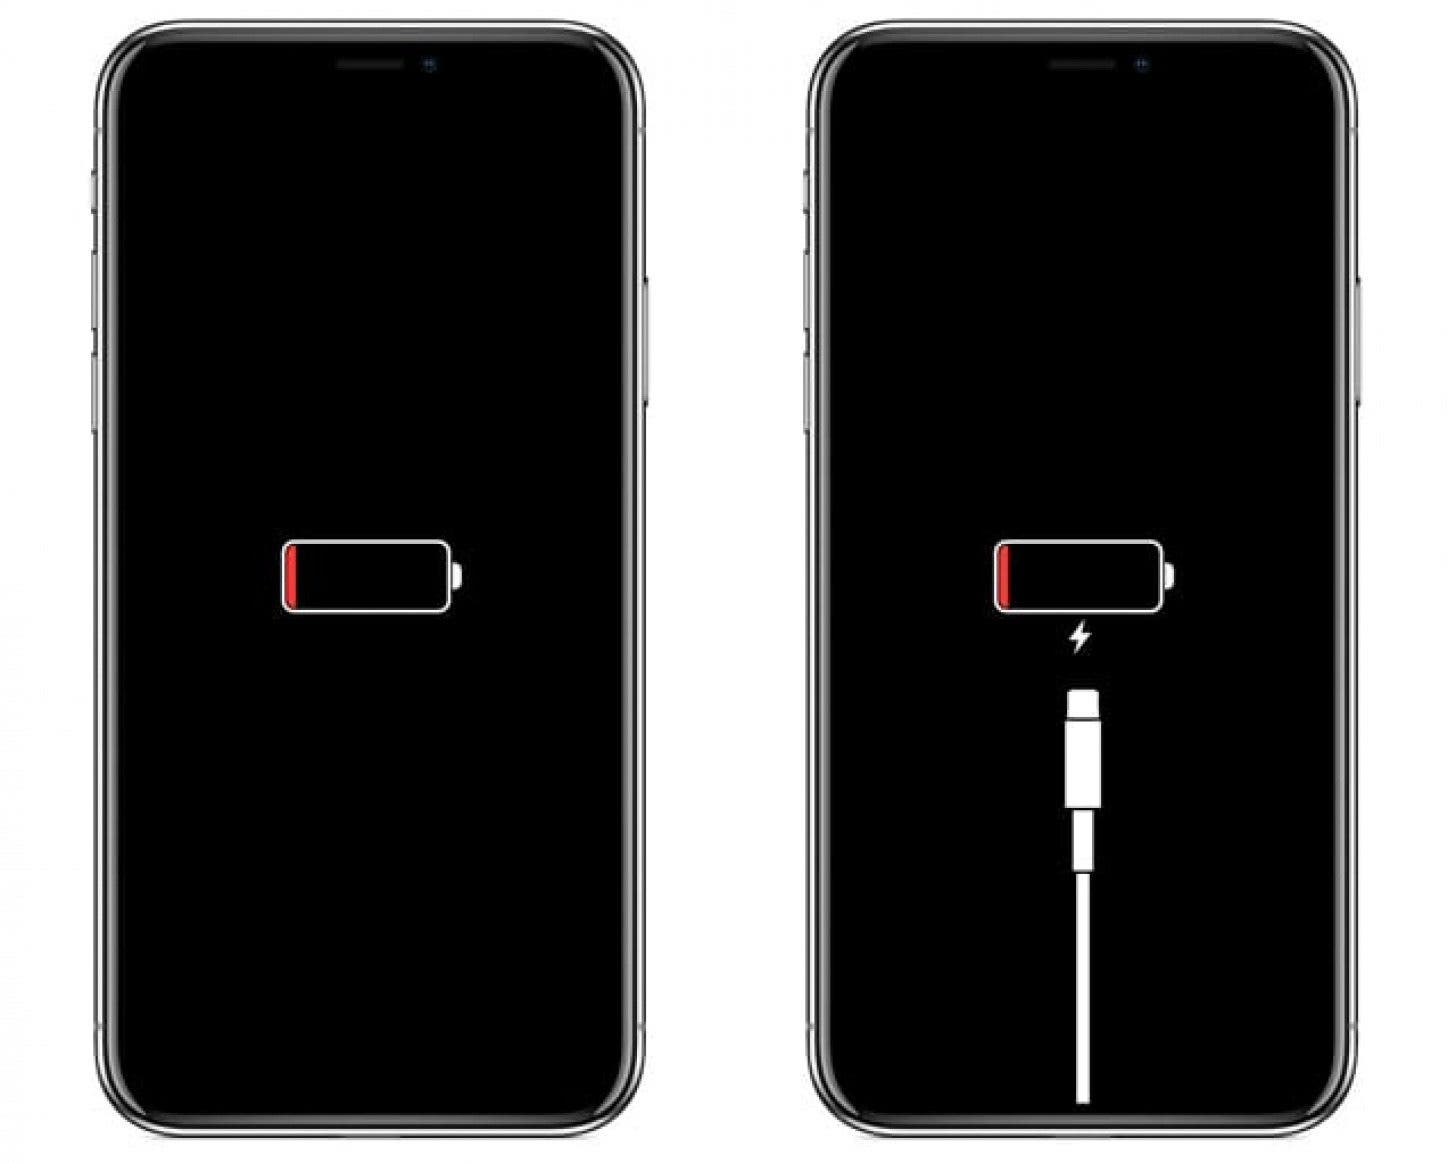 Comparison of battery icons between charging and not charging